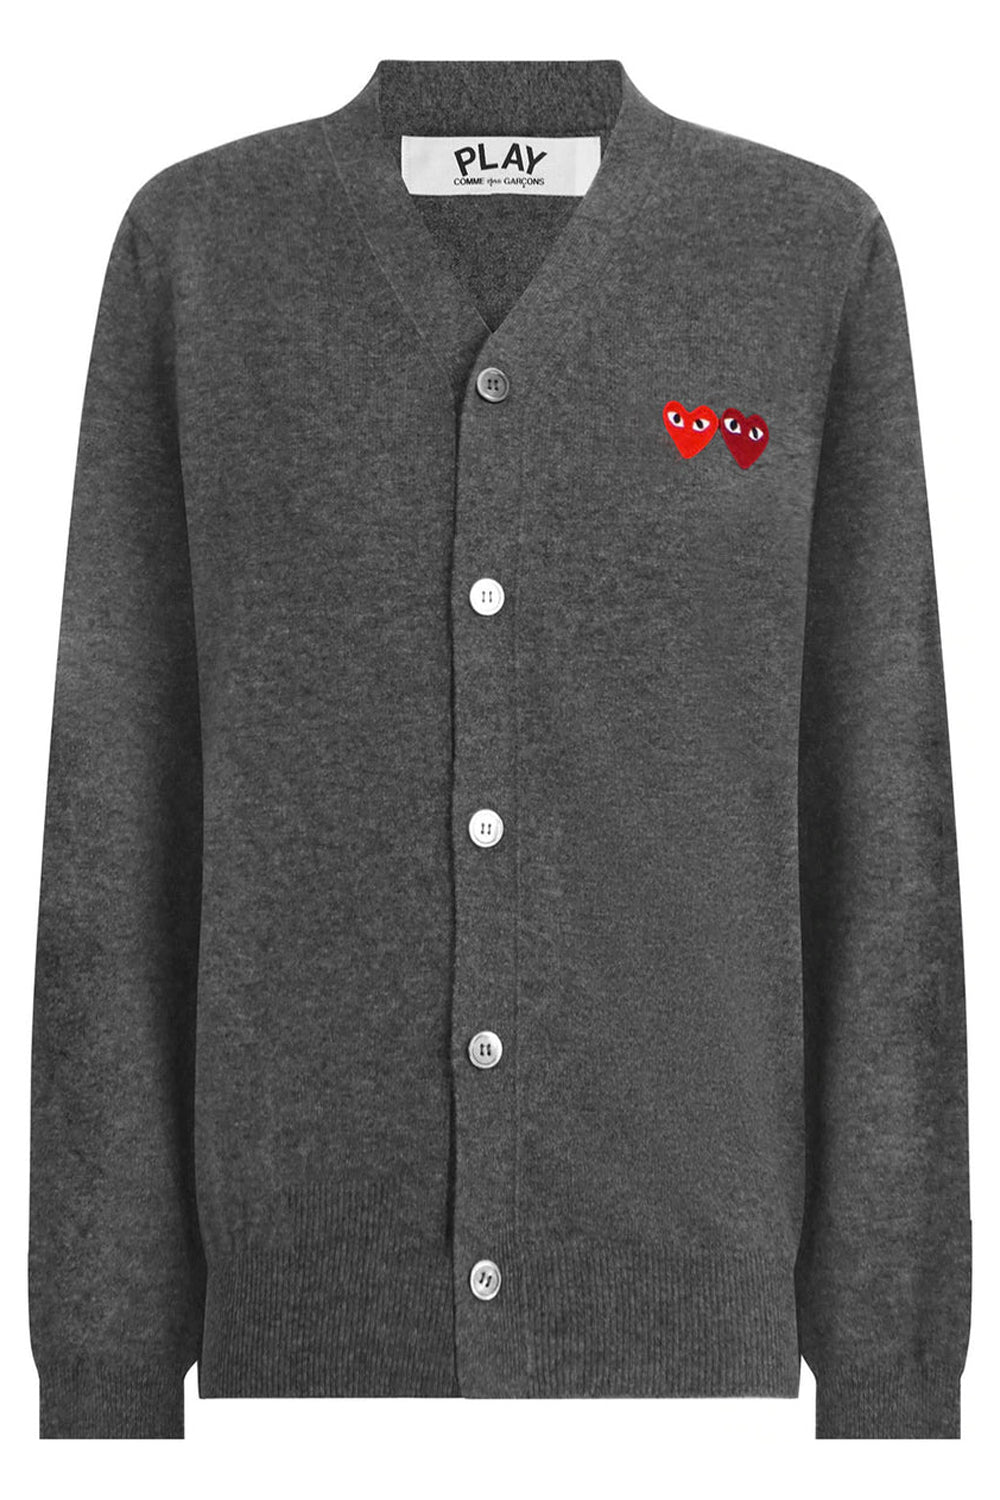 COMME DES GARCONS PLAY RTW PLAY MENS V-NECK DOUBLE HEART CARDIGAN | GREY/RED HEARTS